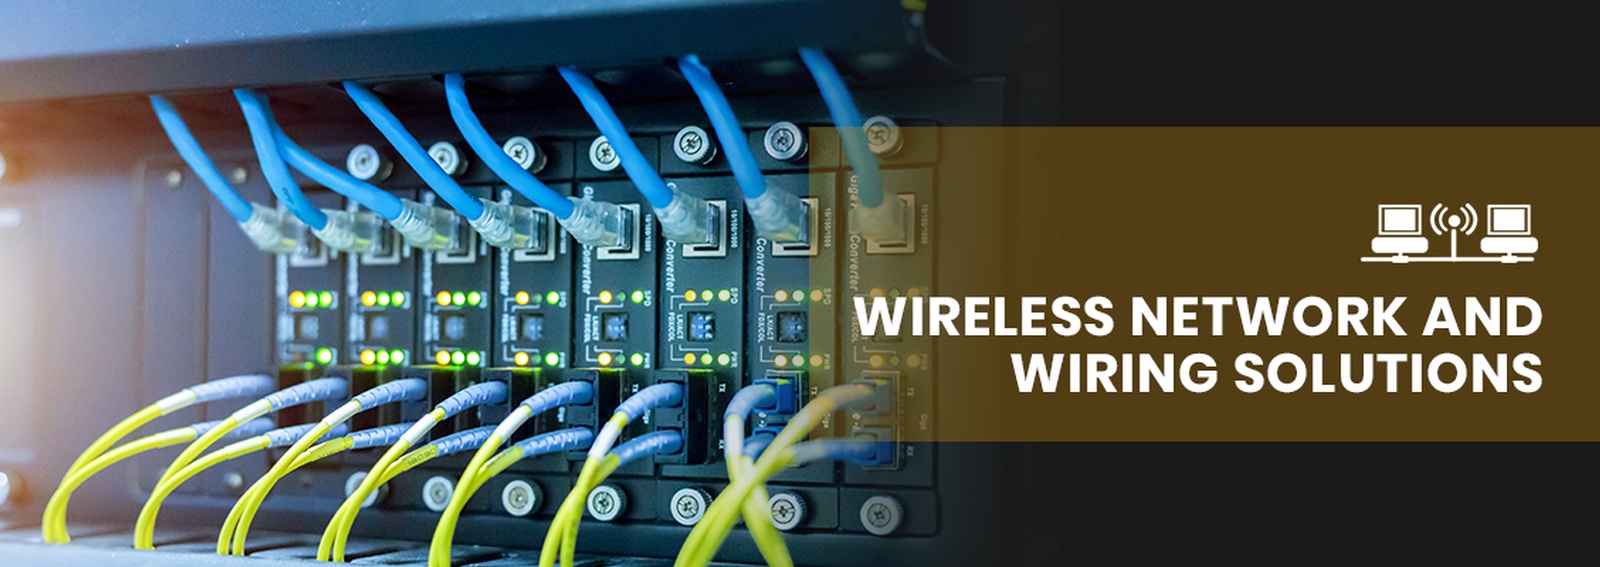 Wireless Network and Wiring Solutions Frederick MD by Nerical LLC